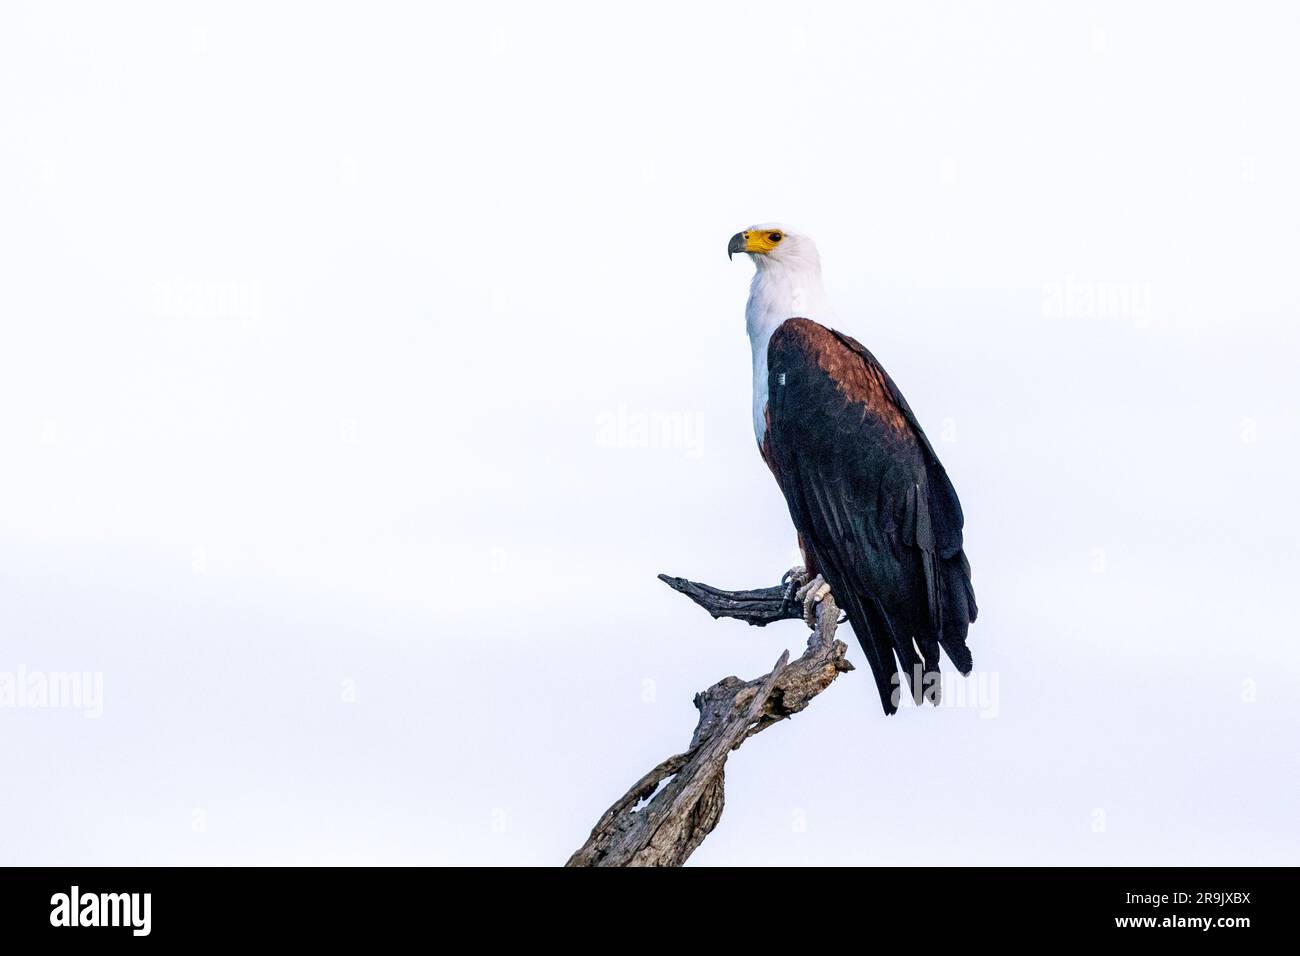 A fish eagle, Haliaeetus vocifer, perched on top of a branch. Stock Photo